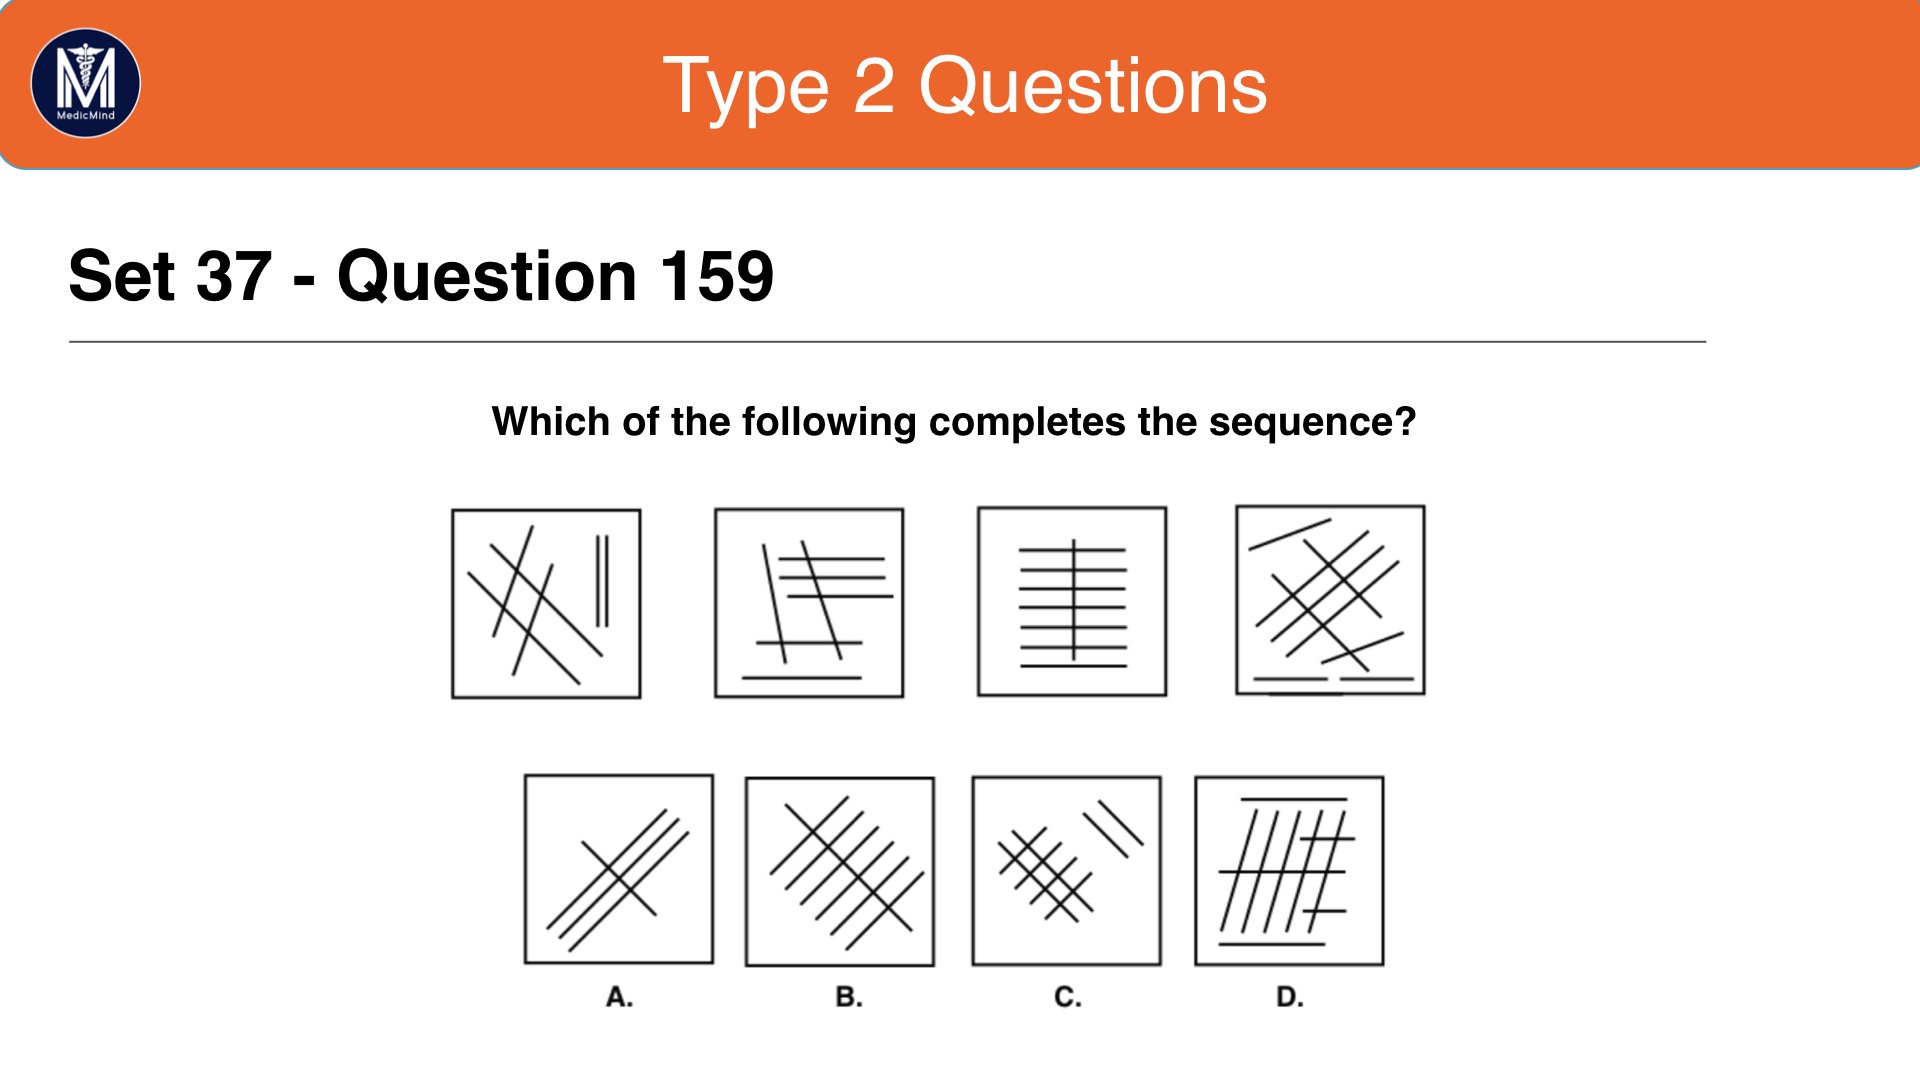 Type 2 Questions